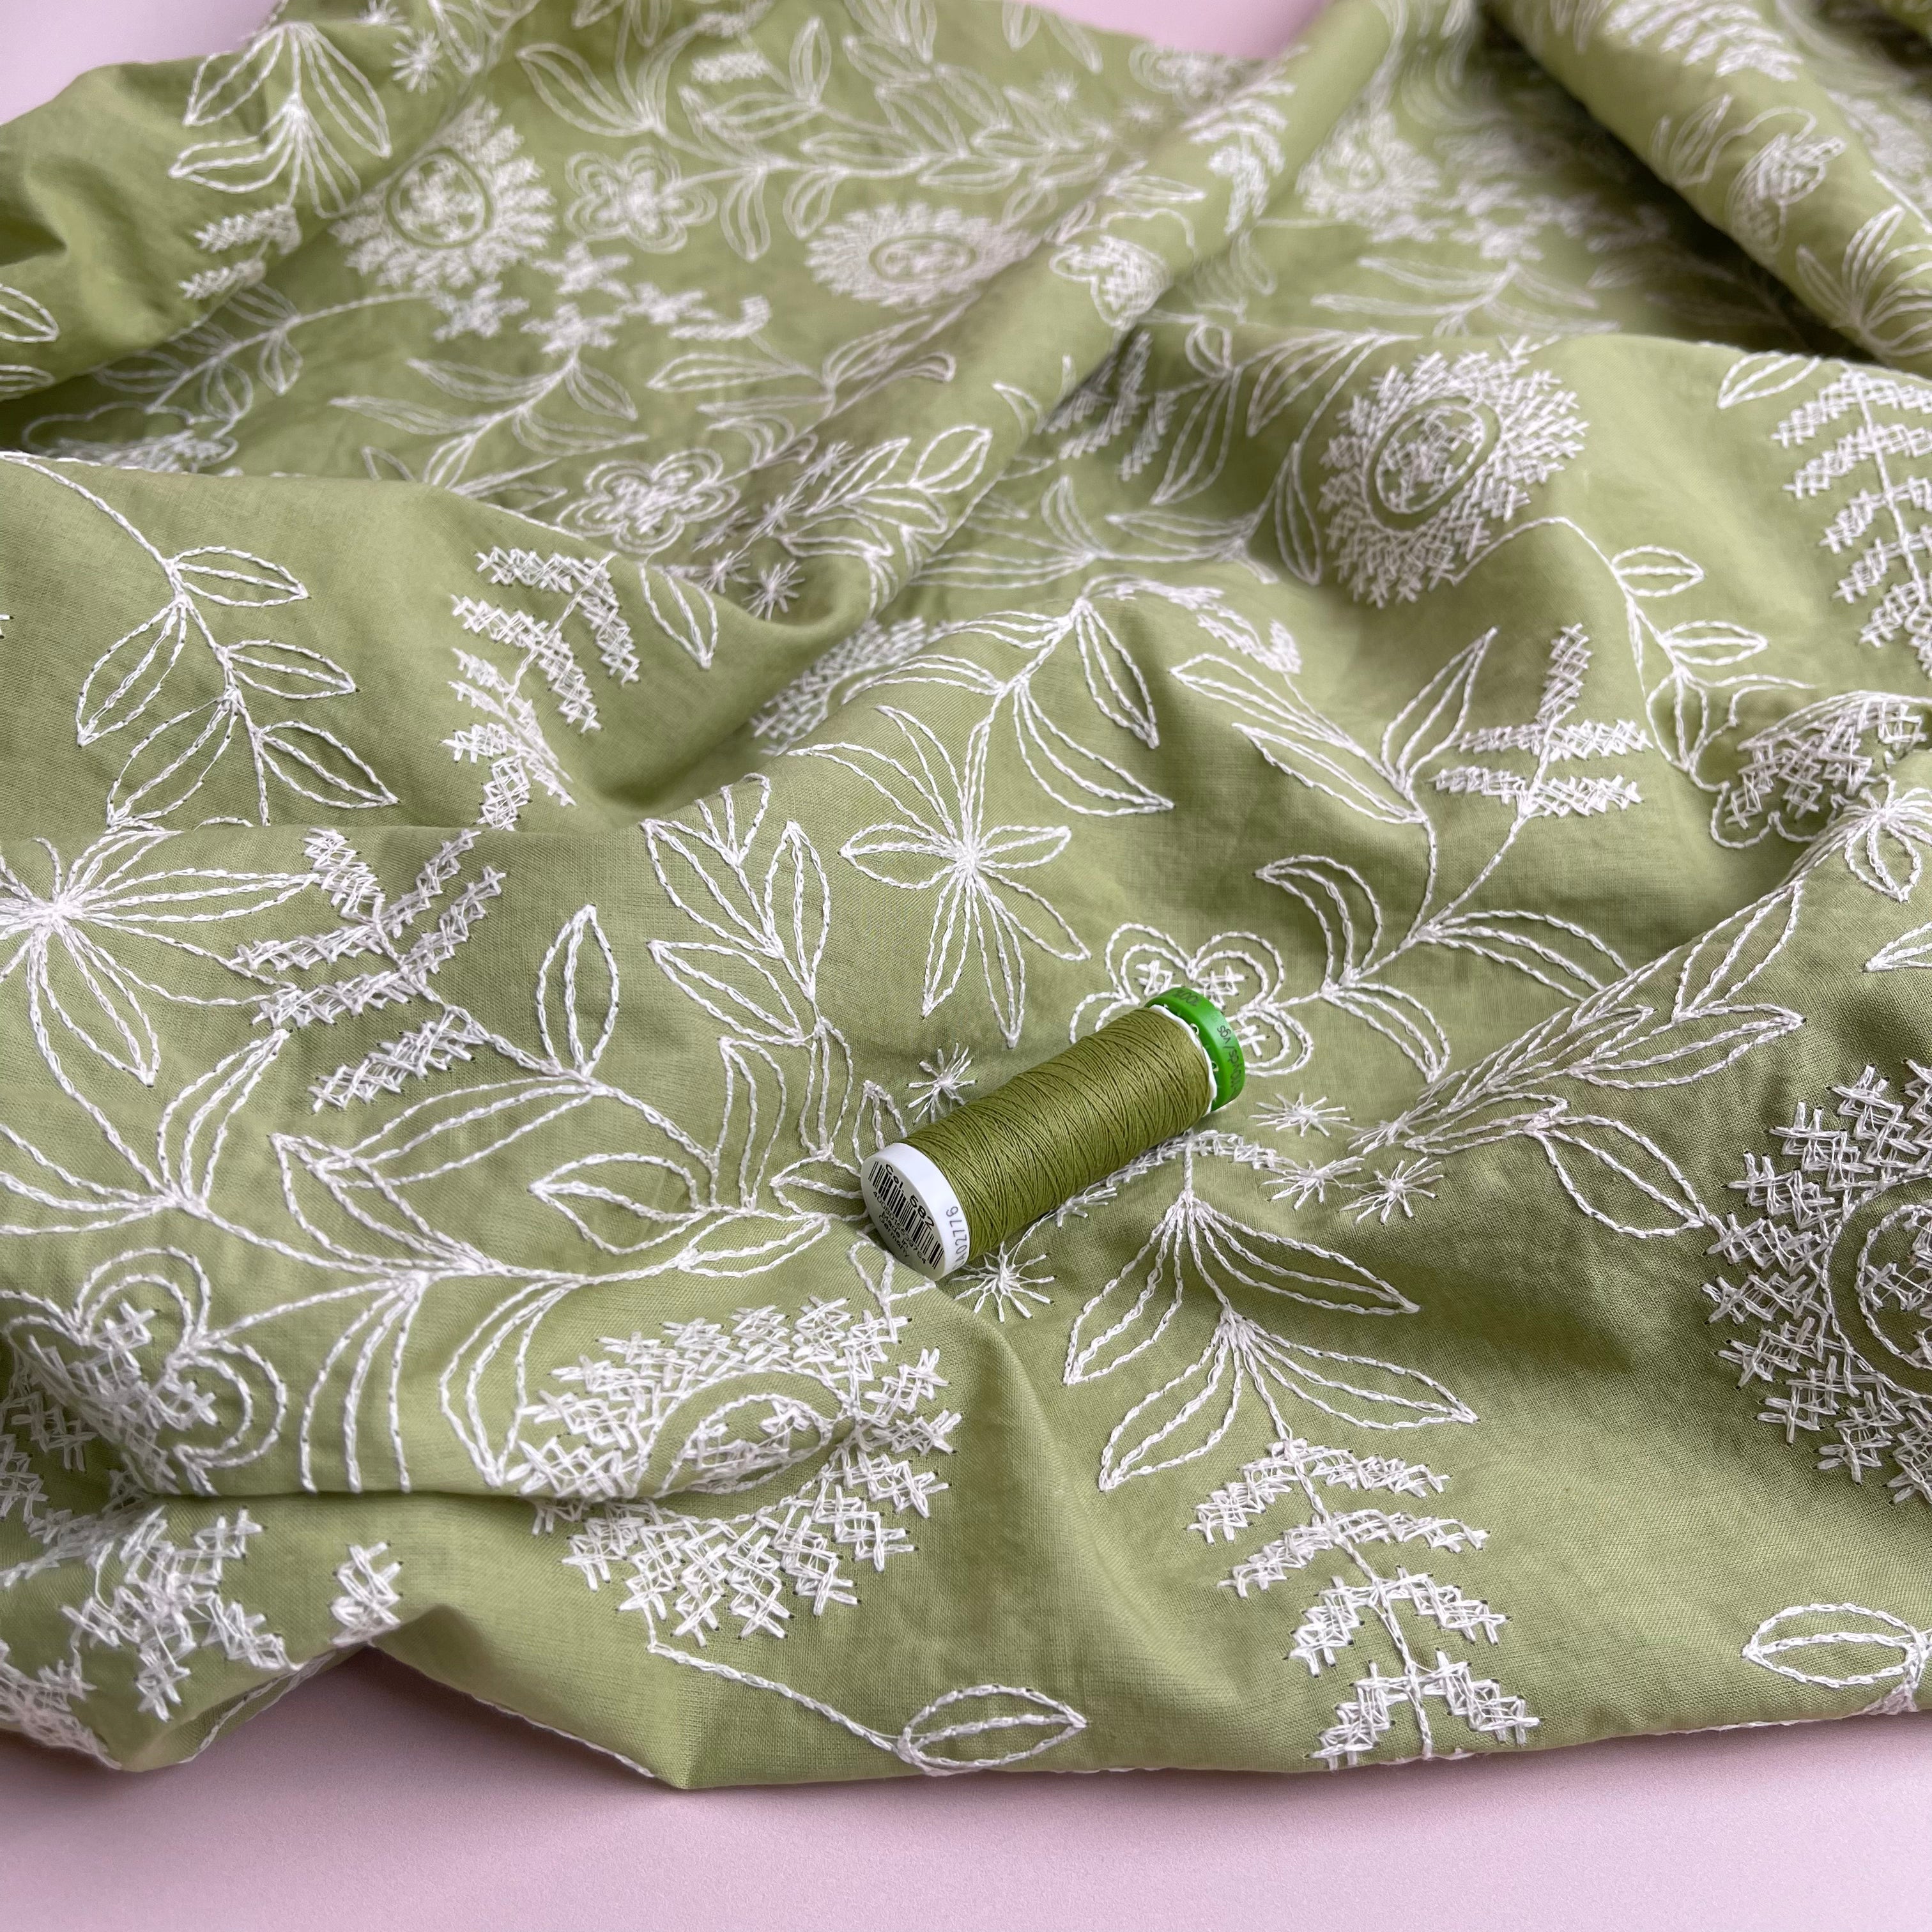 REMNANT 2.10 Metres - Embroidered Wildflowers on Spring Green Cotton Fabric